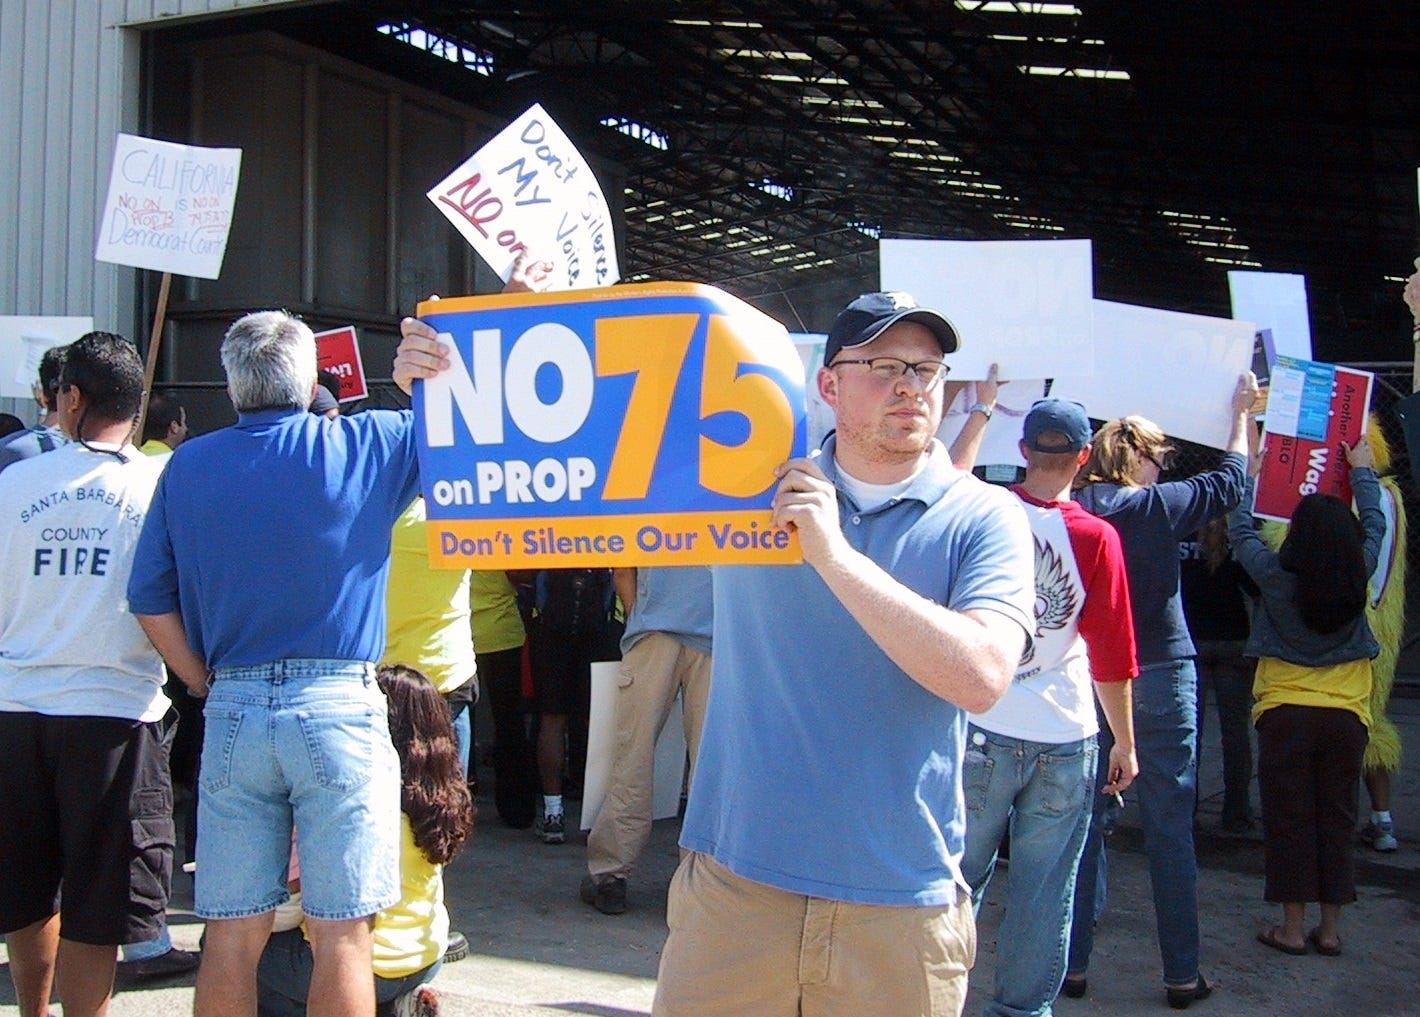 The author holding a protest sign "No on Prop 75, don't silence our voice" at a protest rally.